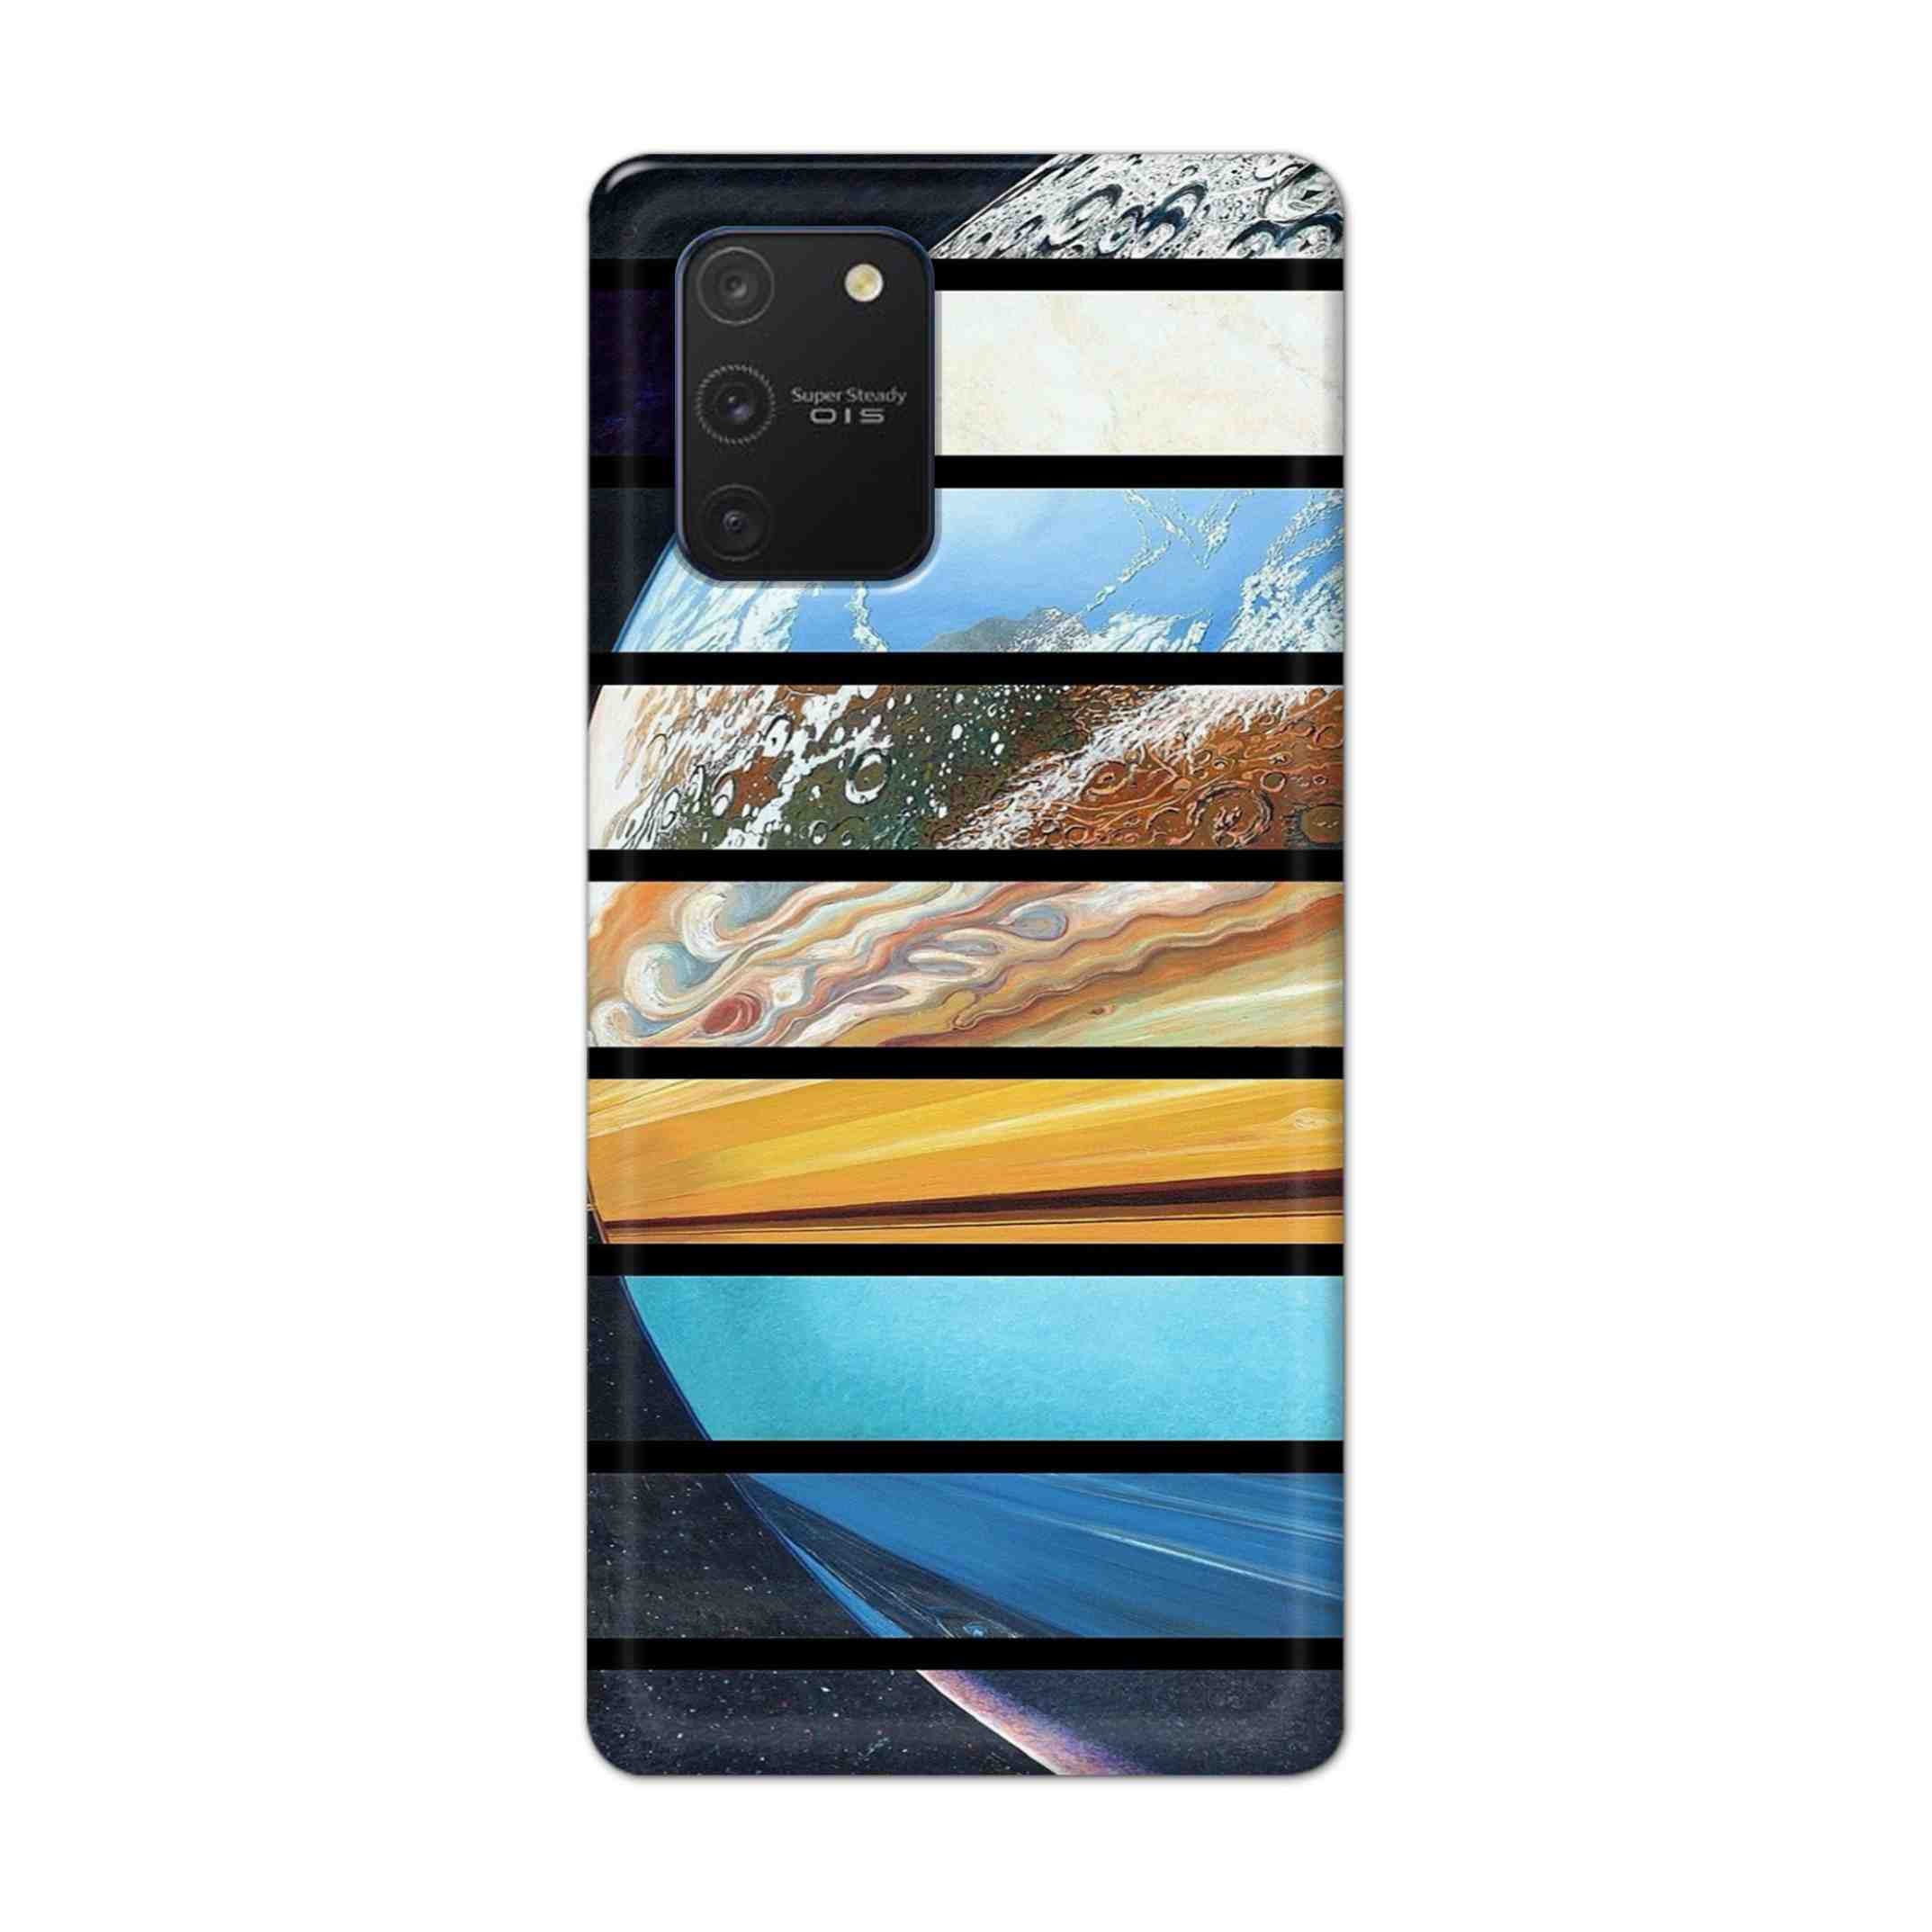 Buy Colourful Earth Hard Back Mobile Phone Case Cover For Samsung Galaxy Note 10 Lite (NEW) Online